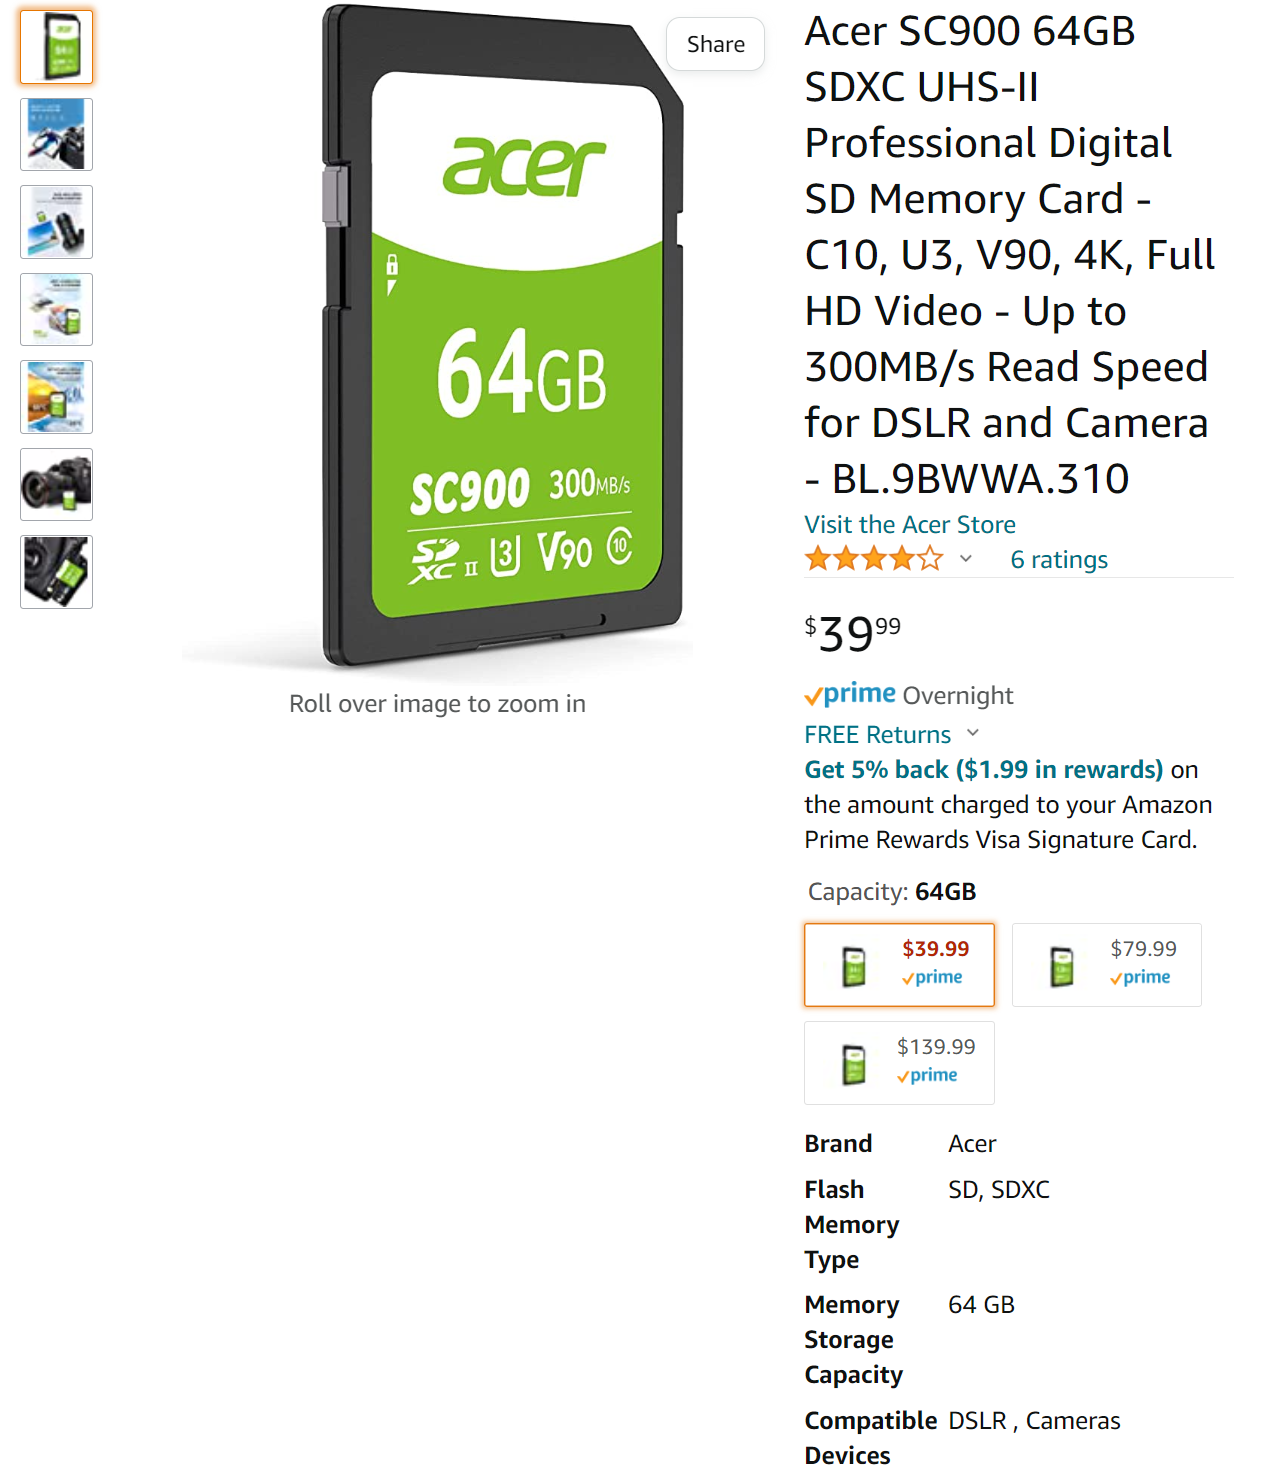 Acer SC900 64GB SDXC UHS-II Professional Digital SD Memory Card - C10, U3, V90, 4K, Full HD Video - Up to 300MB/s Read Speed for DSLR and Camera - BL.9BWWA.310 $39.99